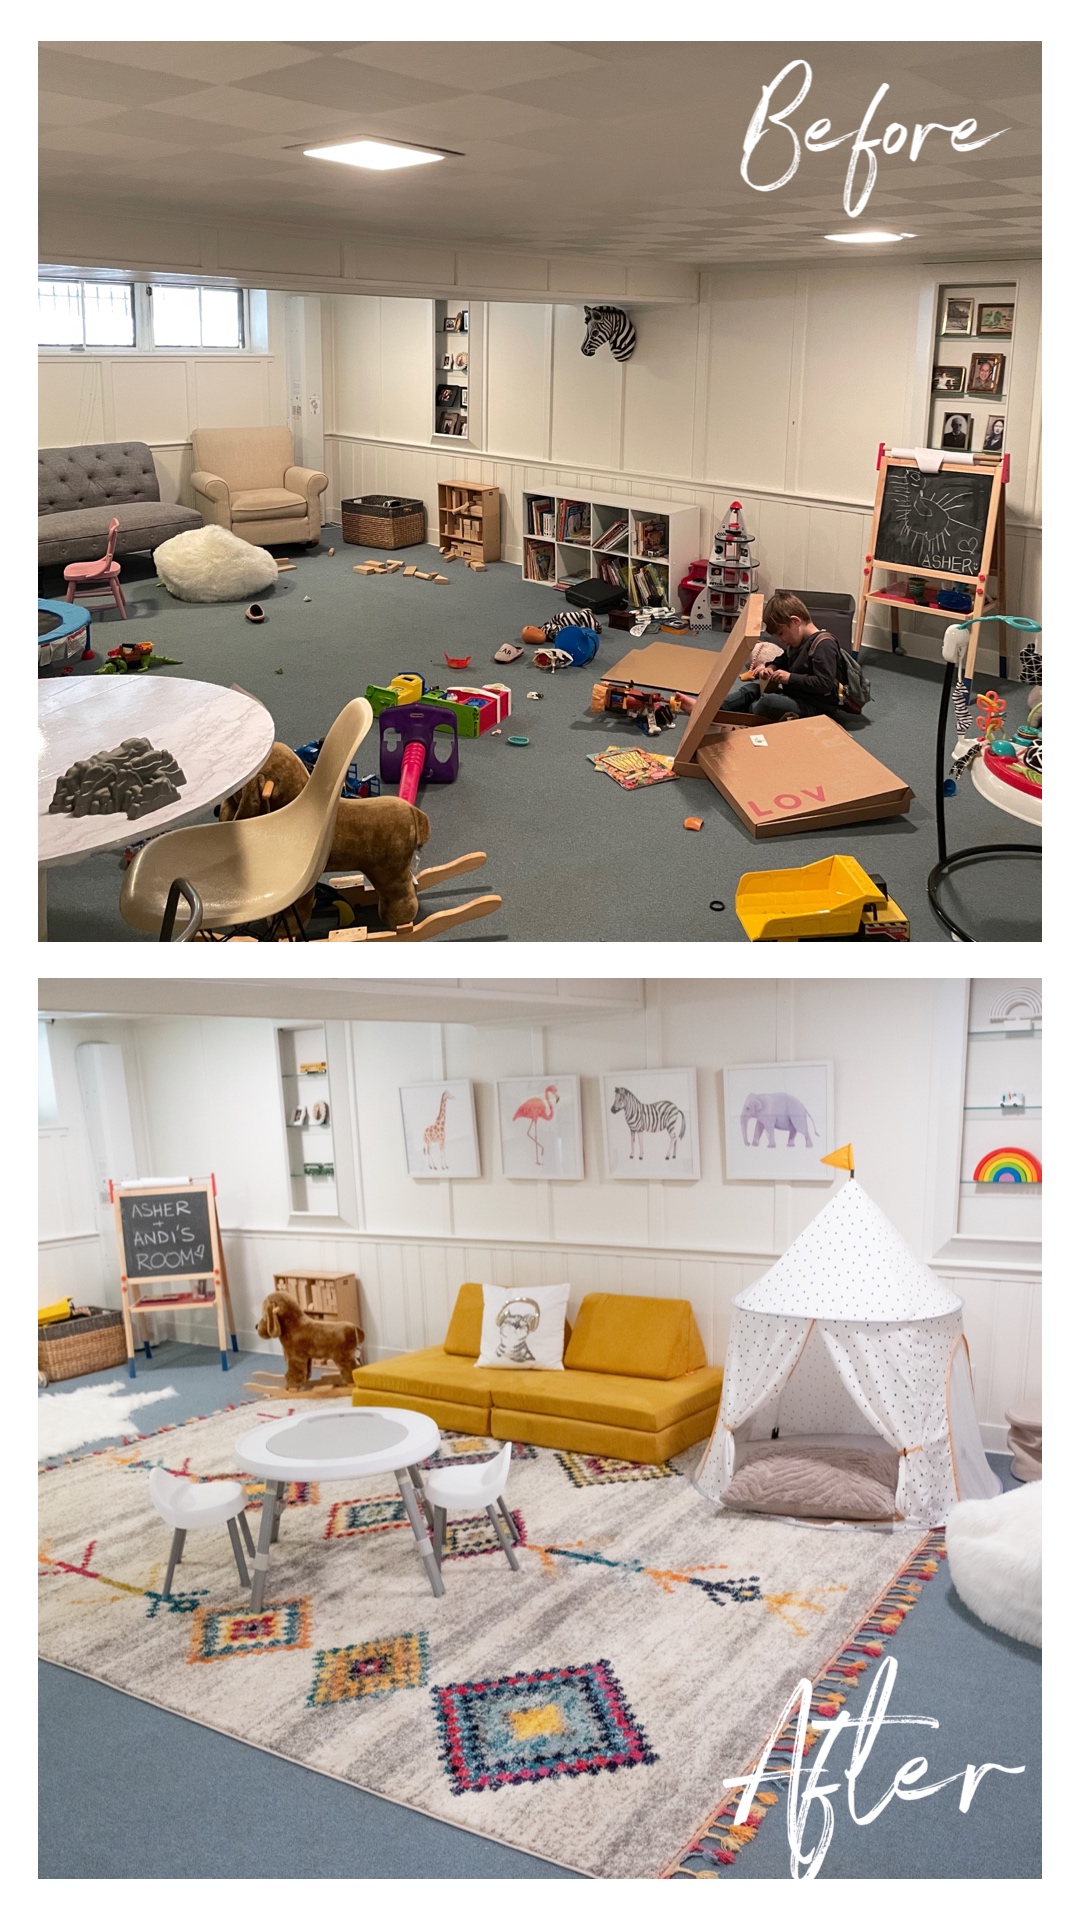 Basement Playroom Makeover On A Budget - The New York Stylist